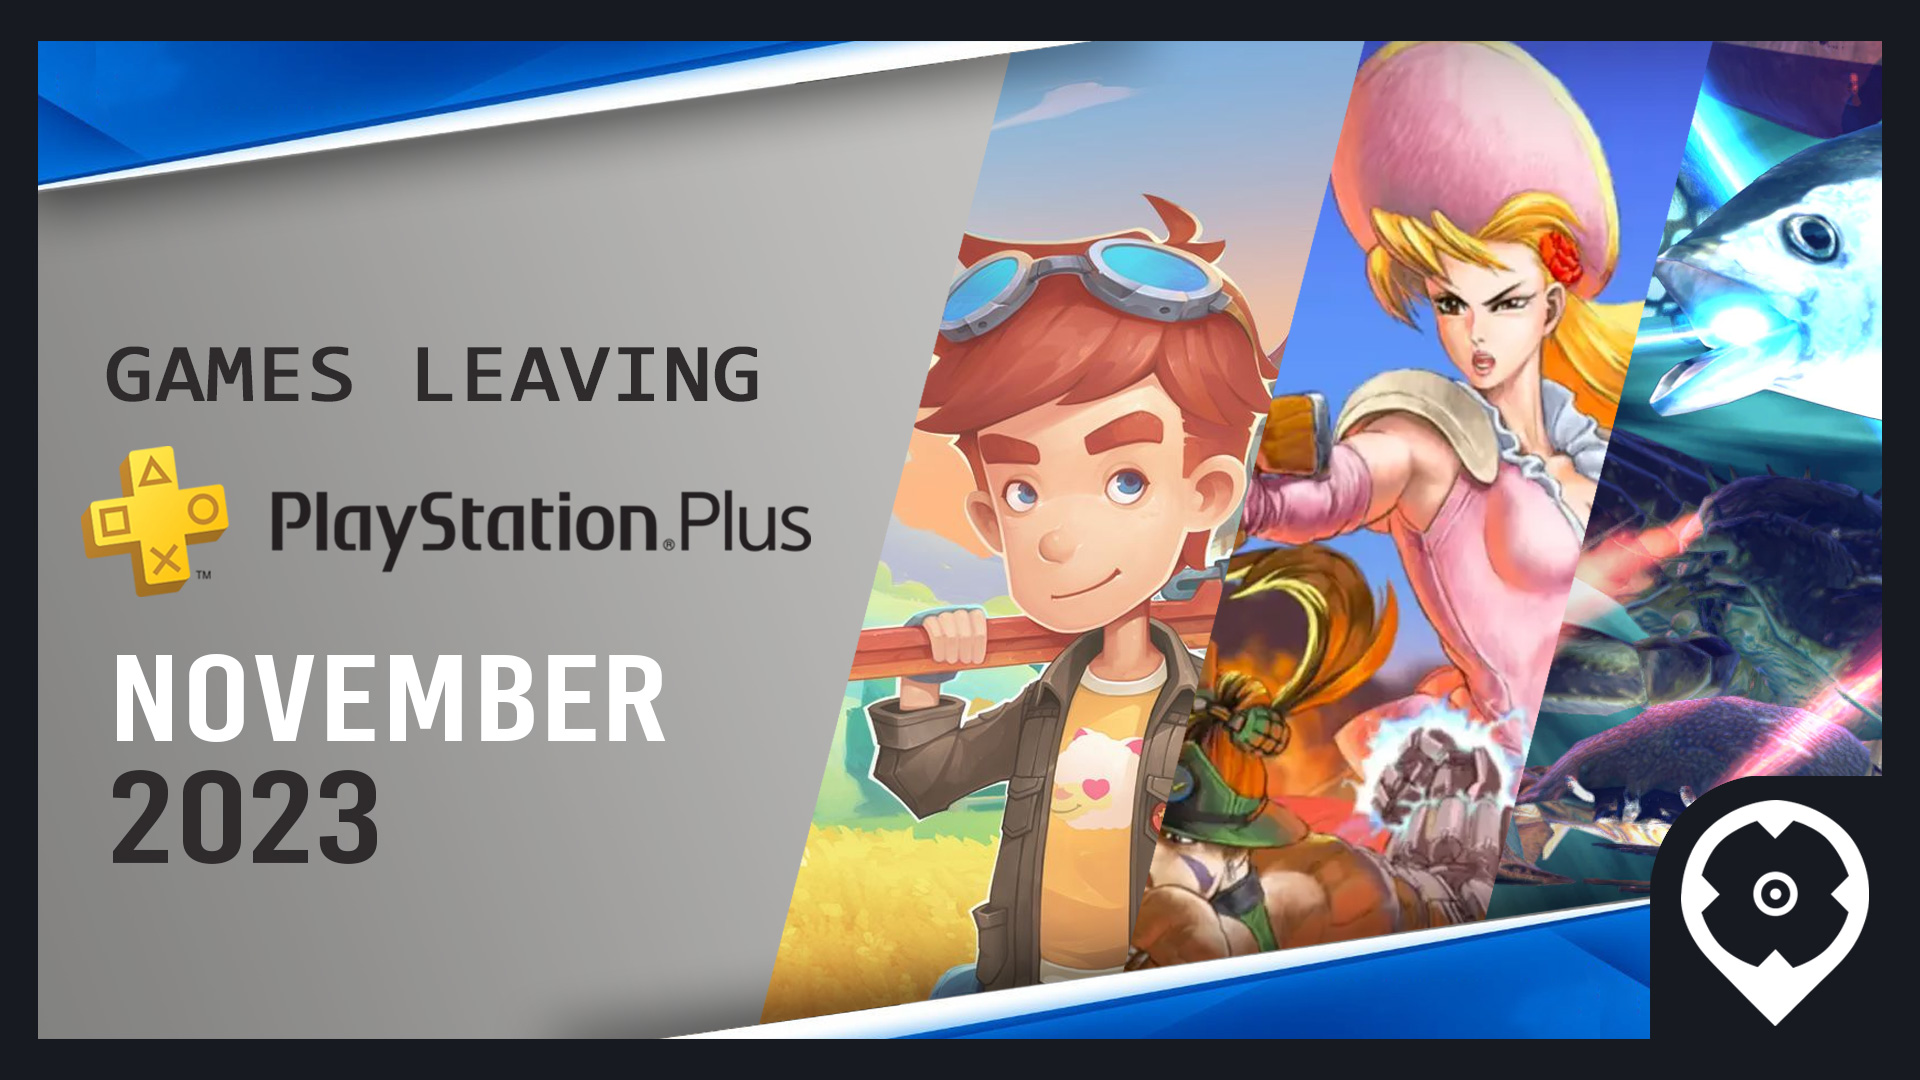 Every PlayStation Plus Essential, Extra, & Premium Game Available November  2023